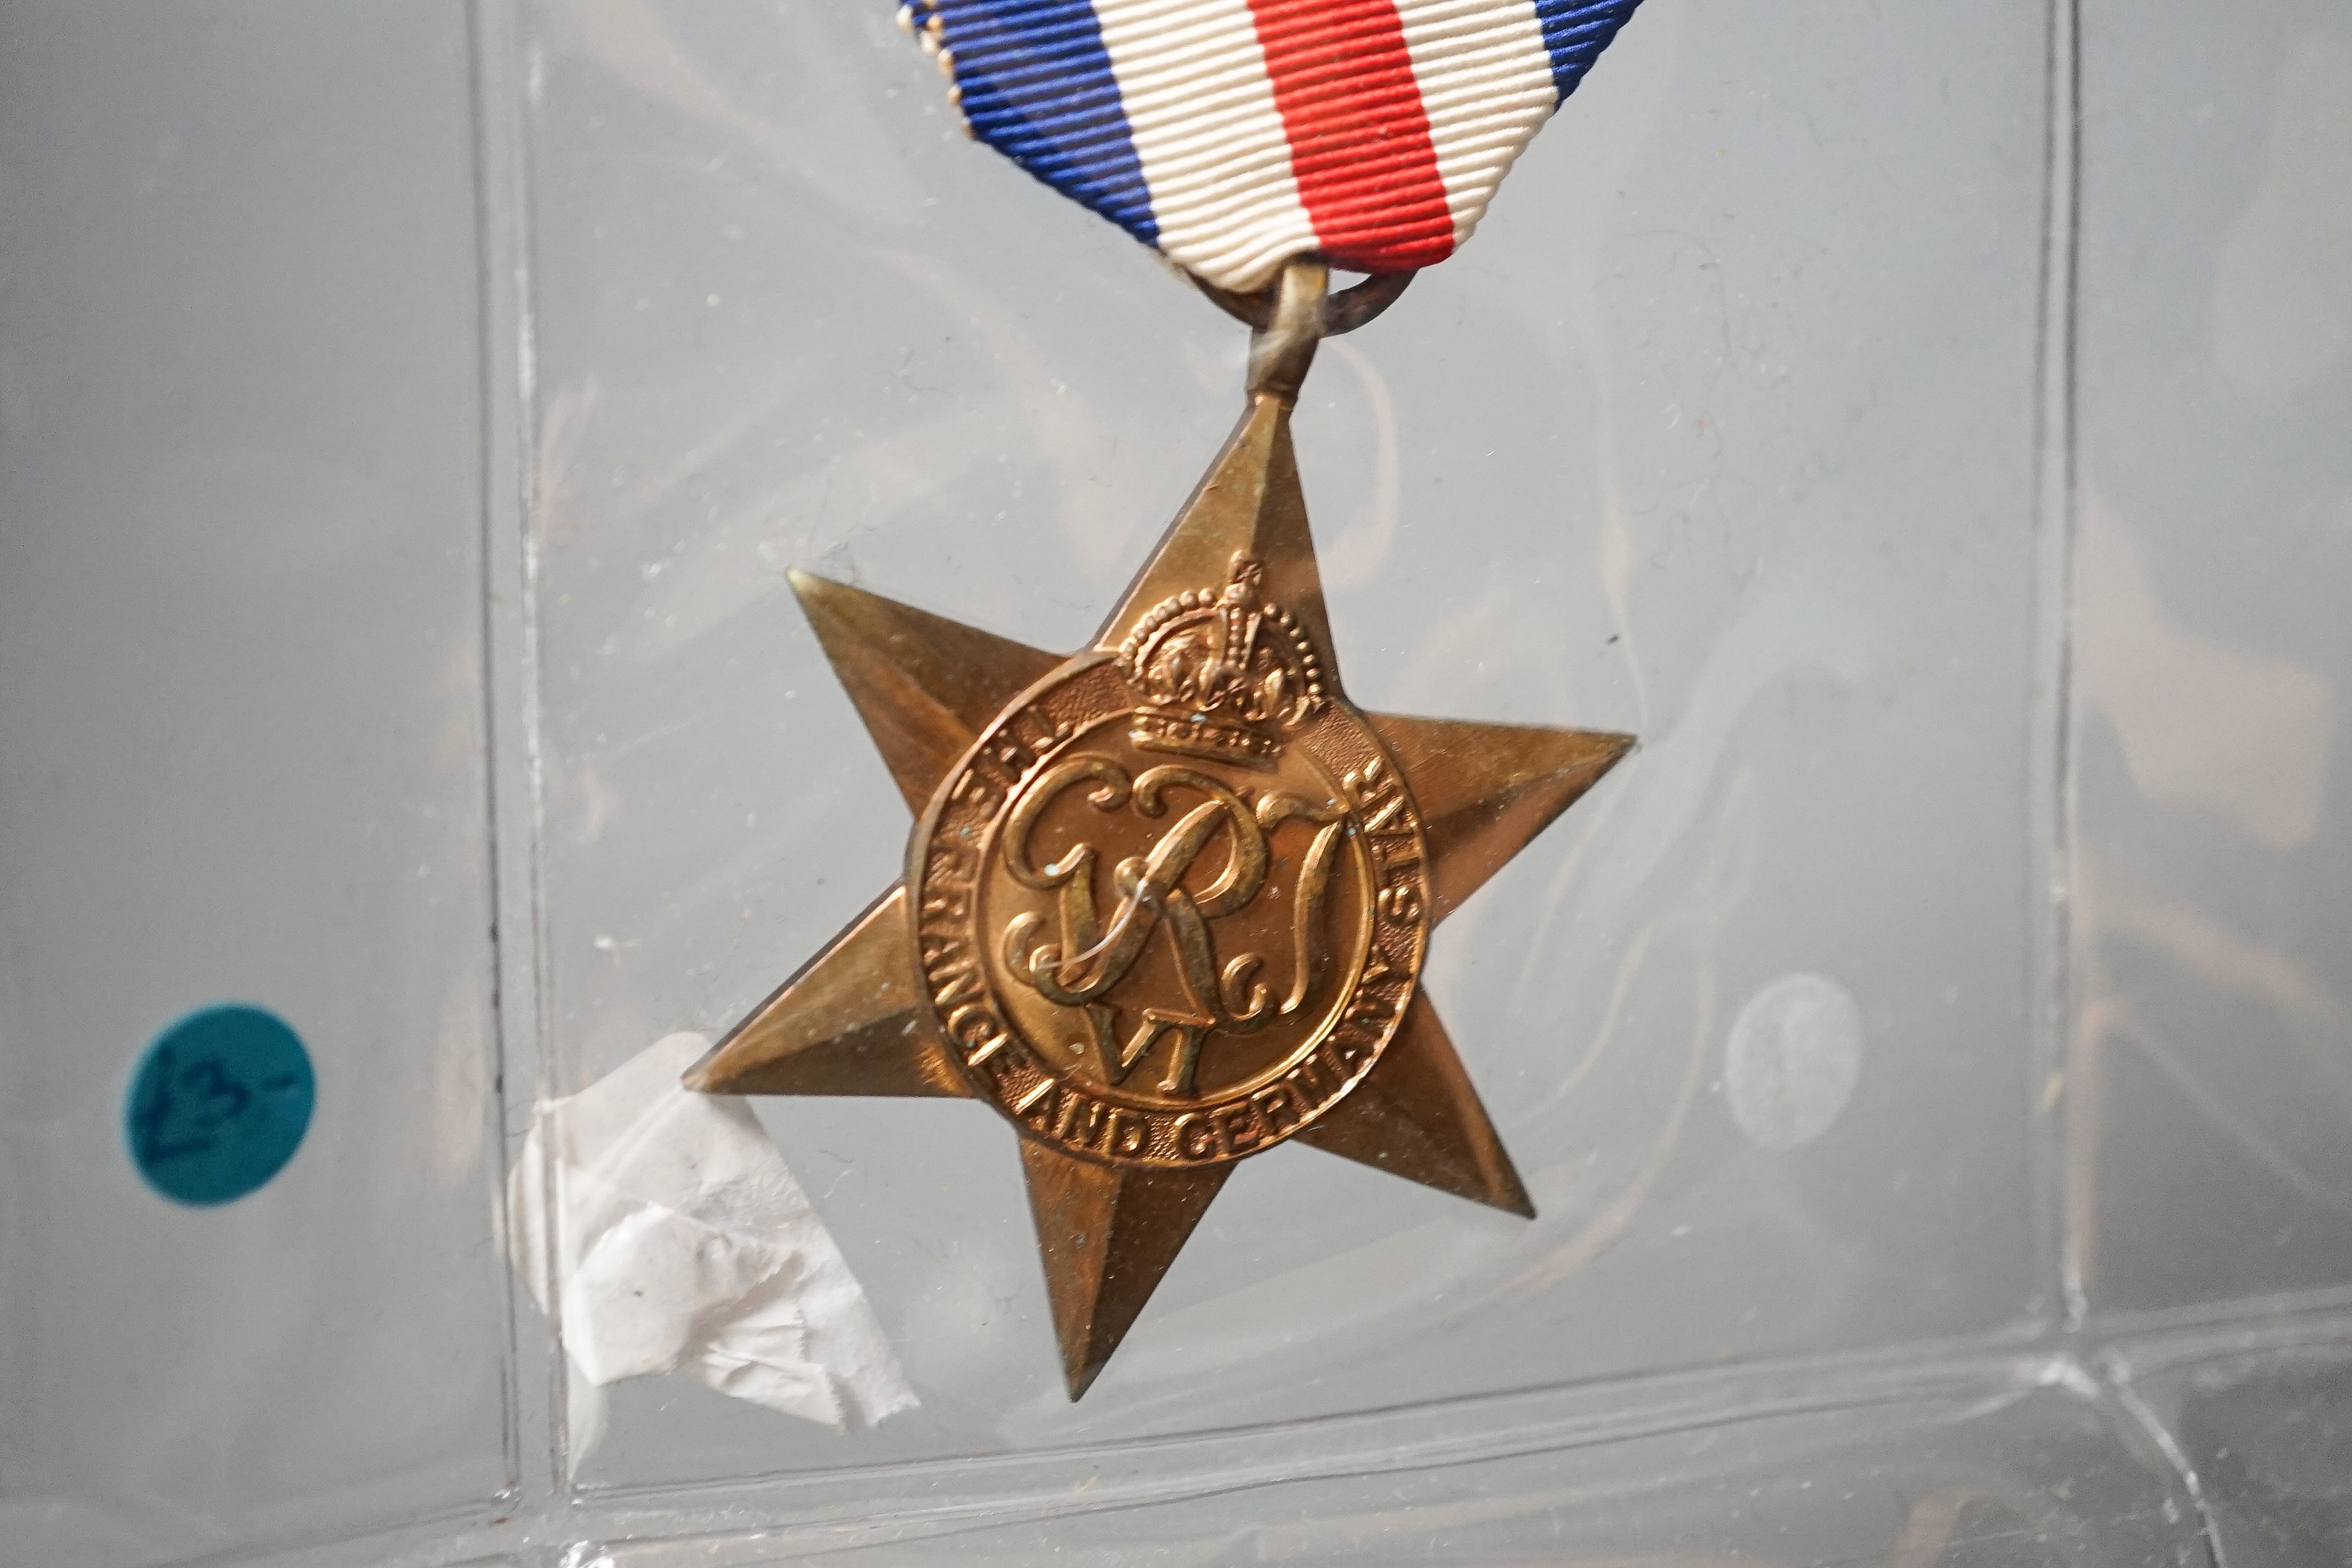 Fifteen unnamed WW2 medals to include Aircrew Europe star, 1939-1945 star (two), the Africa star, the Pacific, the Burma star, The Italy star (two), the Defence medal (two), France and Germany star, Canadian silver Defen